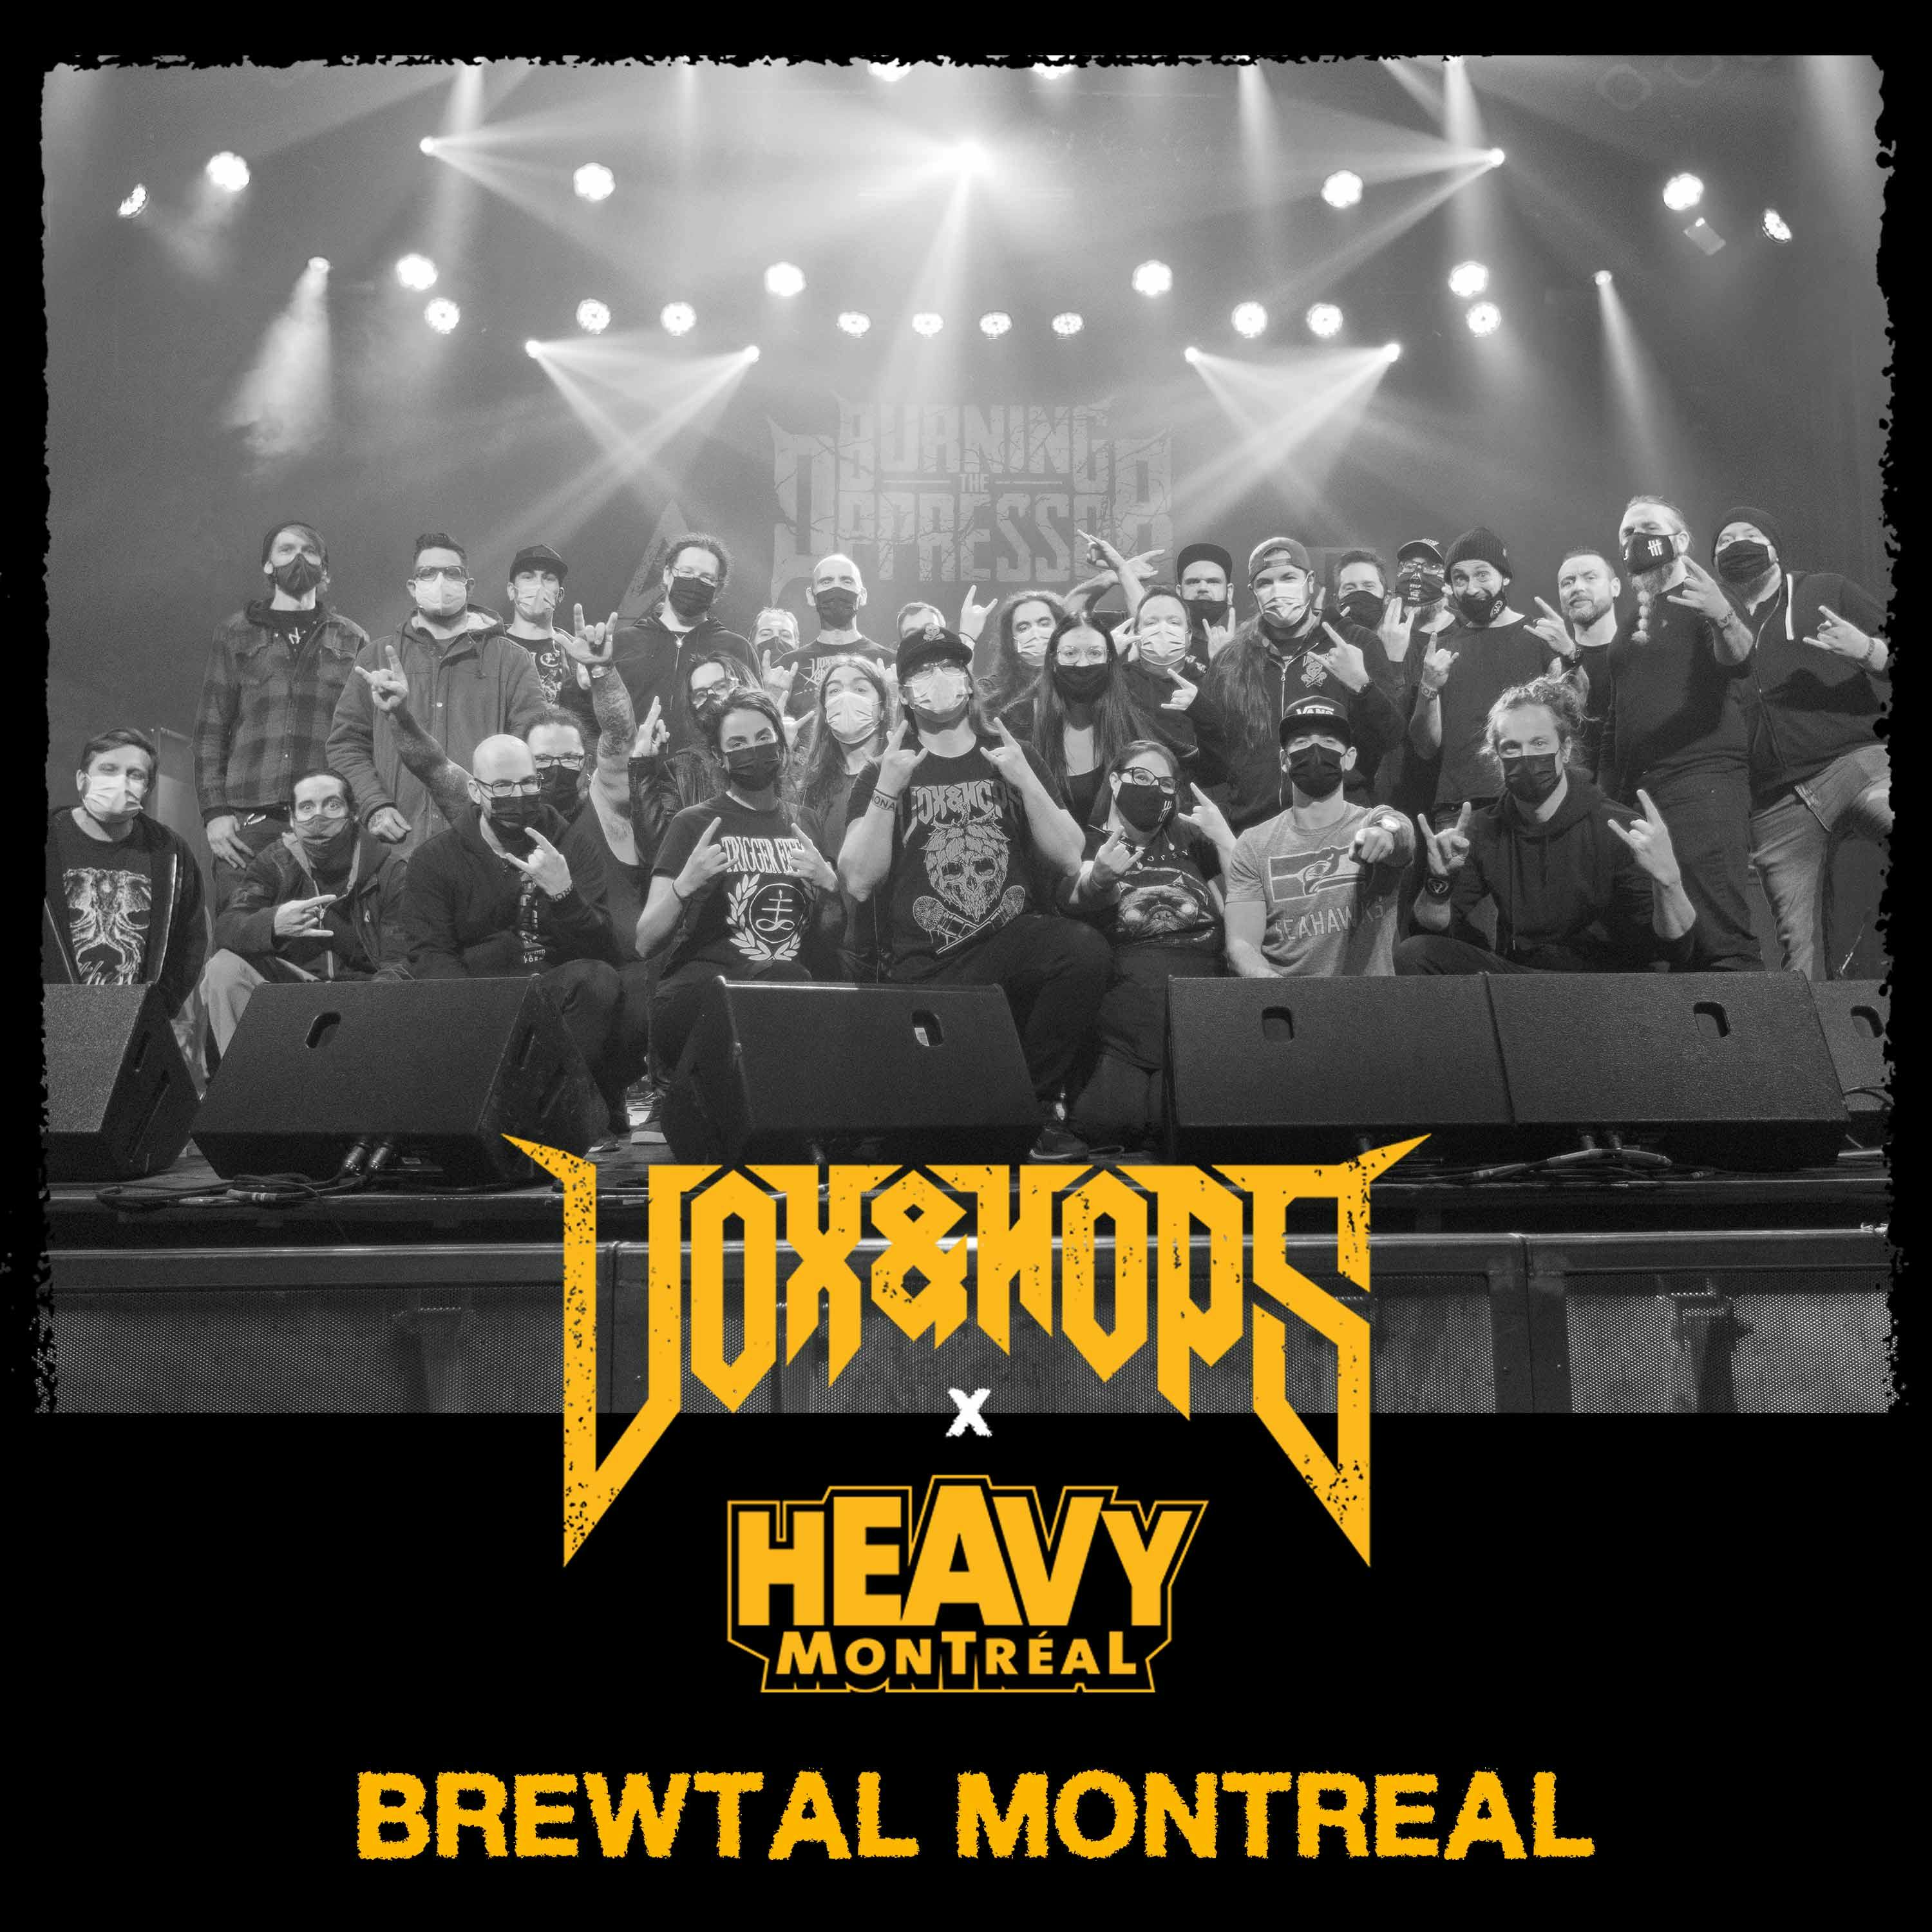 This is Brewtal Montreal